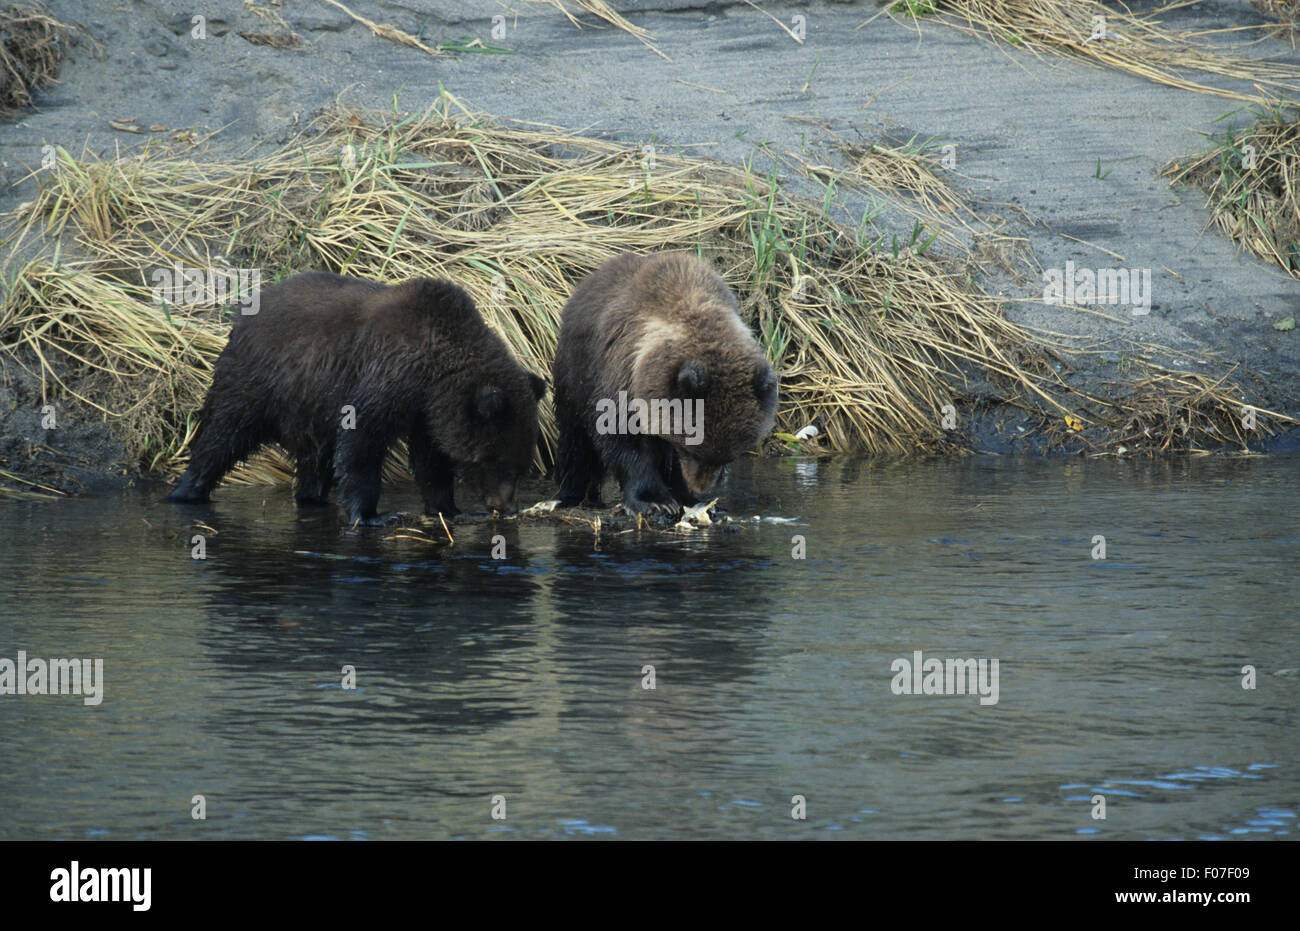 Grizzly Bear Alaskan two small cubs standing in water by river bank feeding on carcass of fish in water Stock Photo